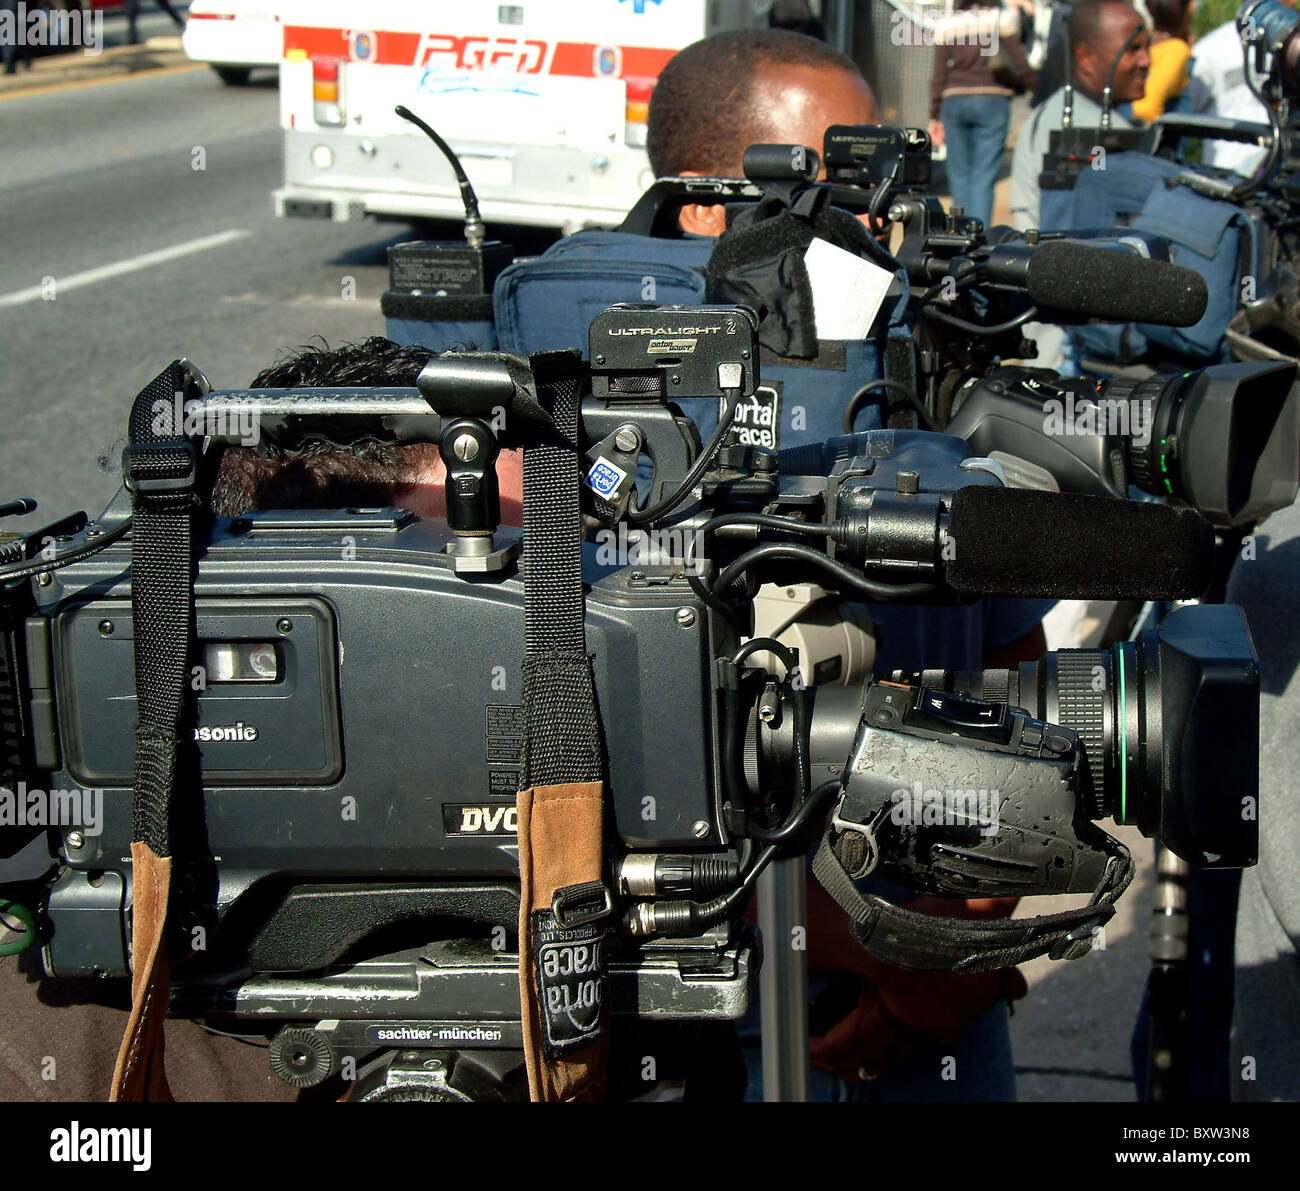 TV cameras prepared for a news conference Stock Photo